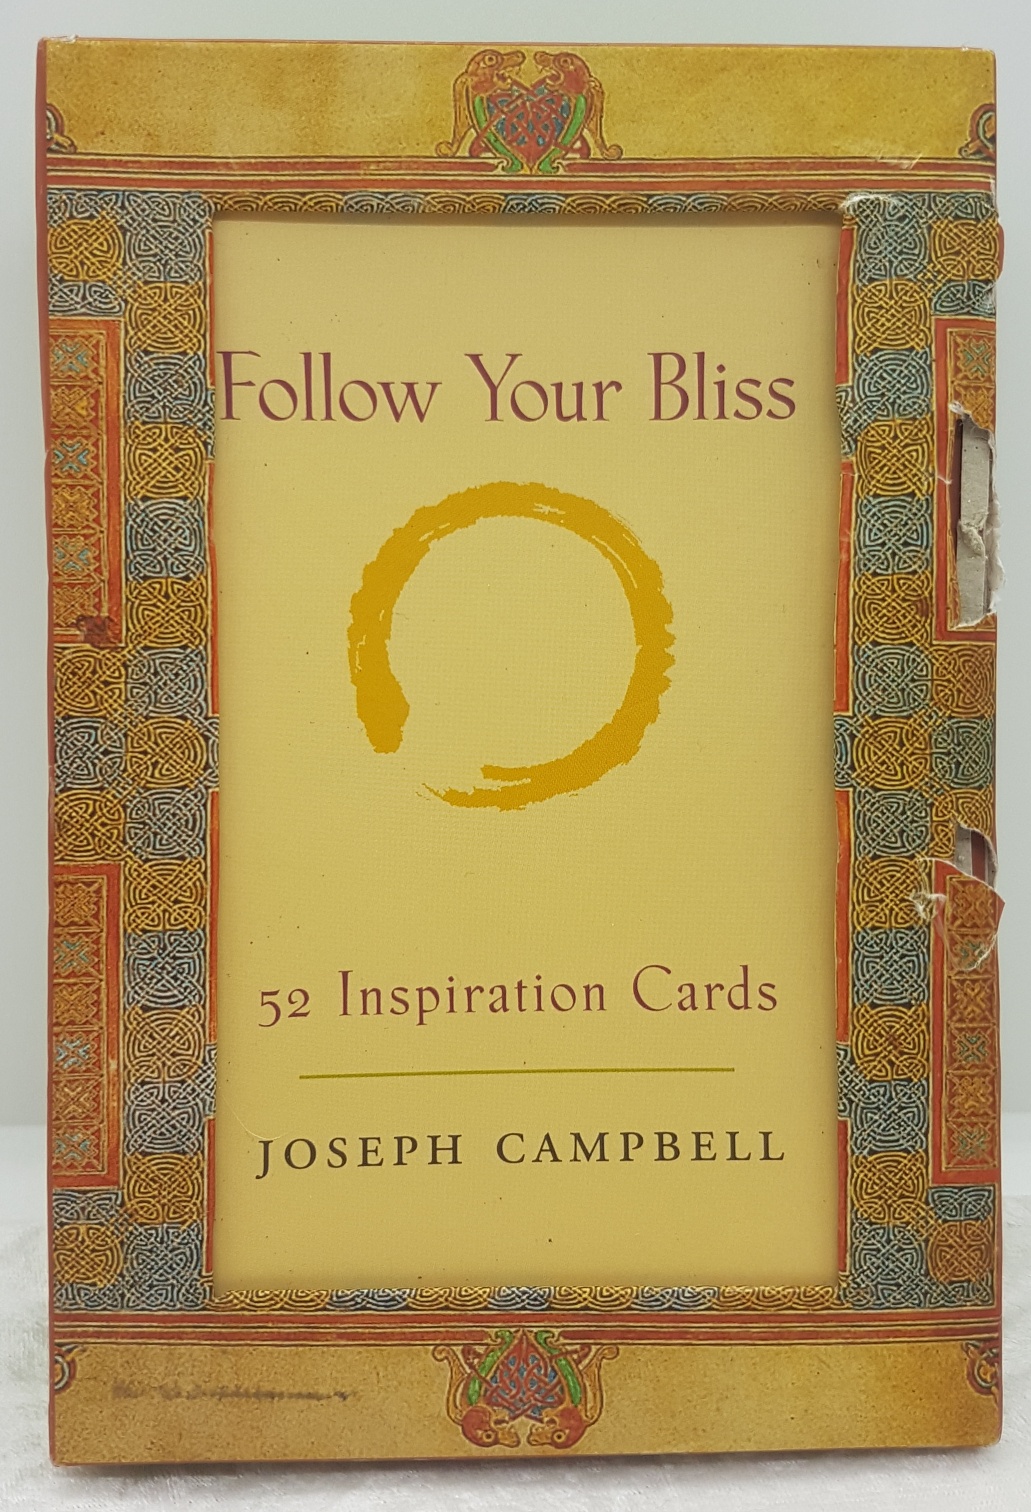 PRELOVED Follow Your Bliss - Joseph Campbell